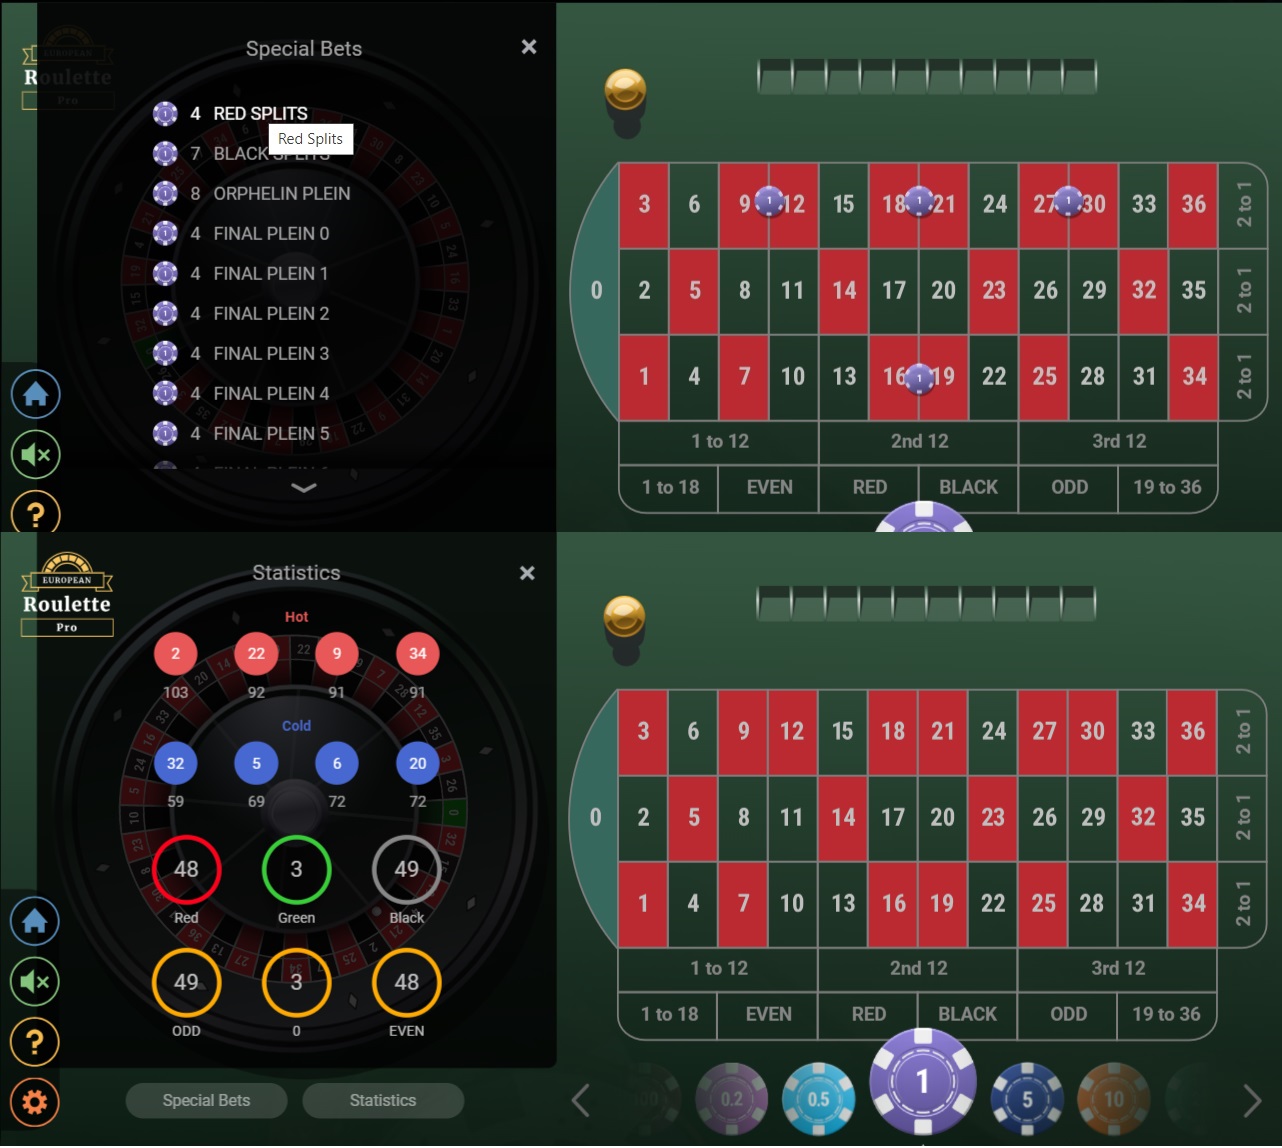 Online Roulette - European Roulette Pro - GVG - Screenshot - Special Bets & Statistics - MGJ